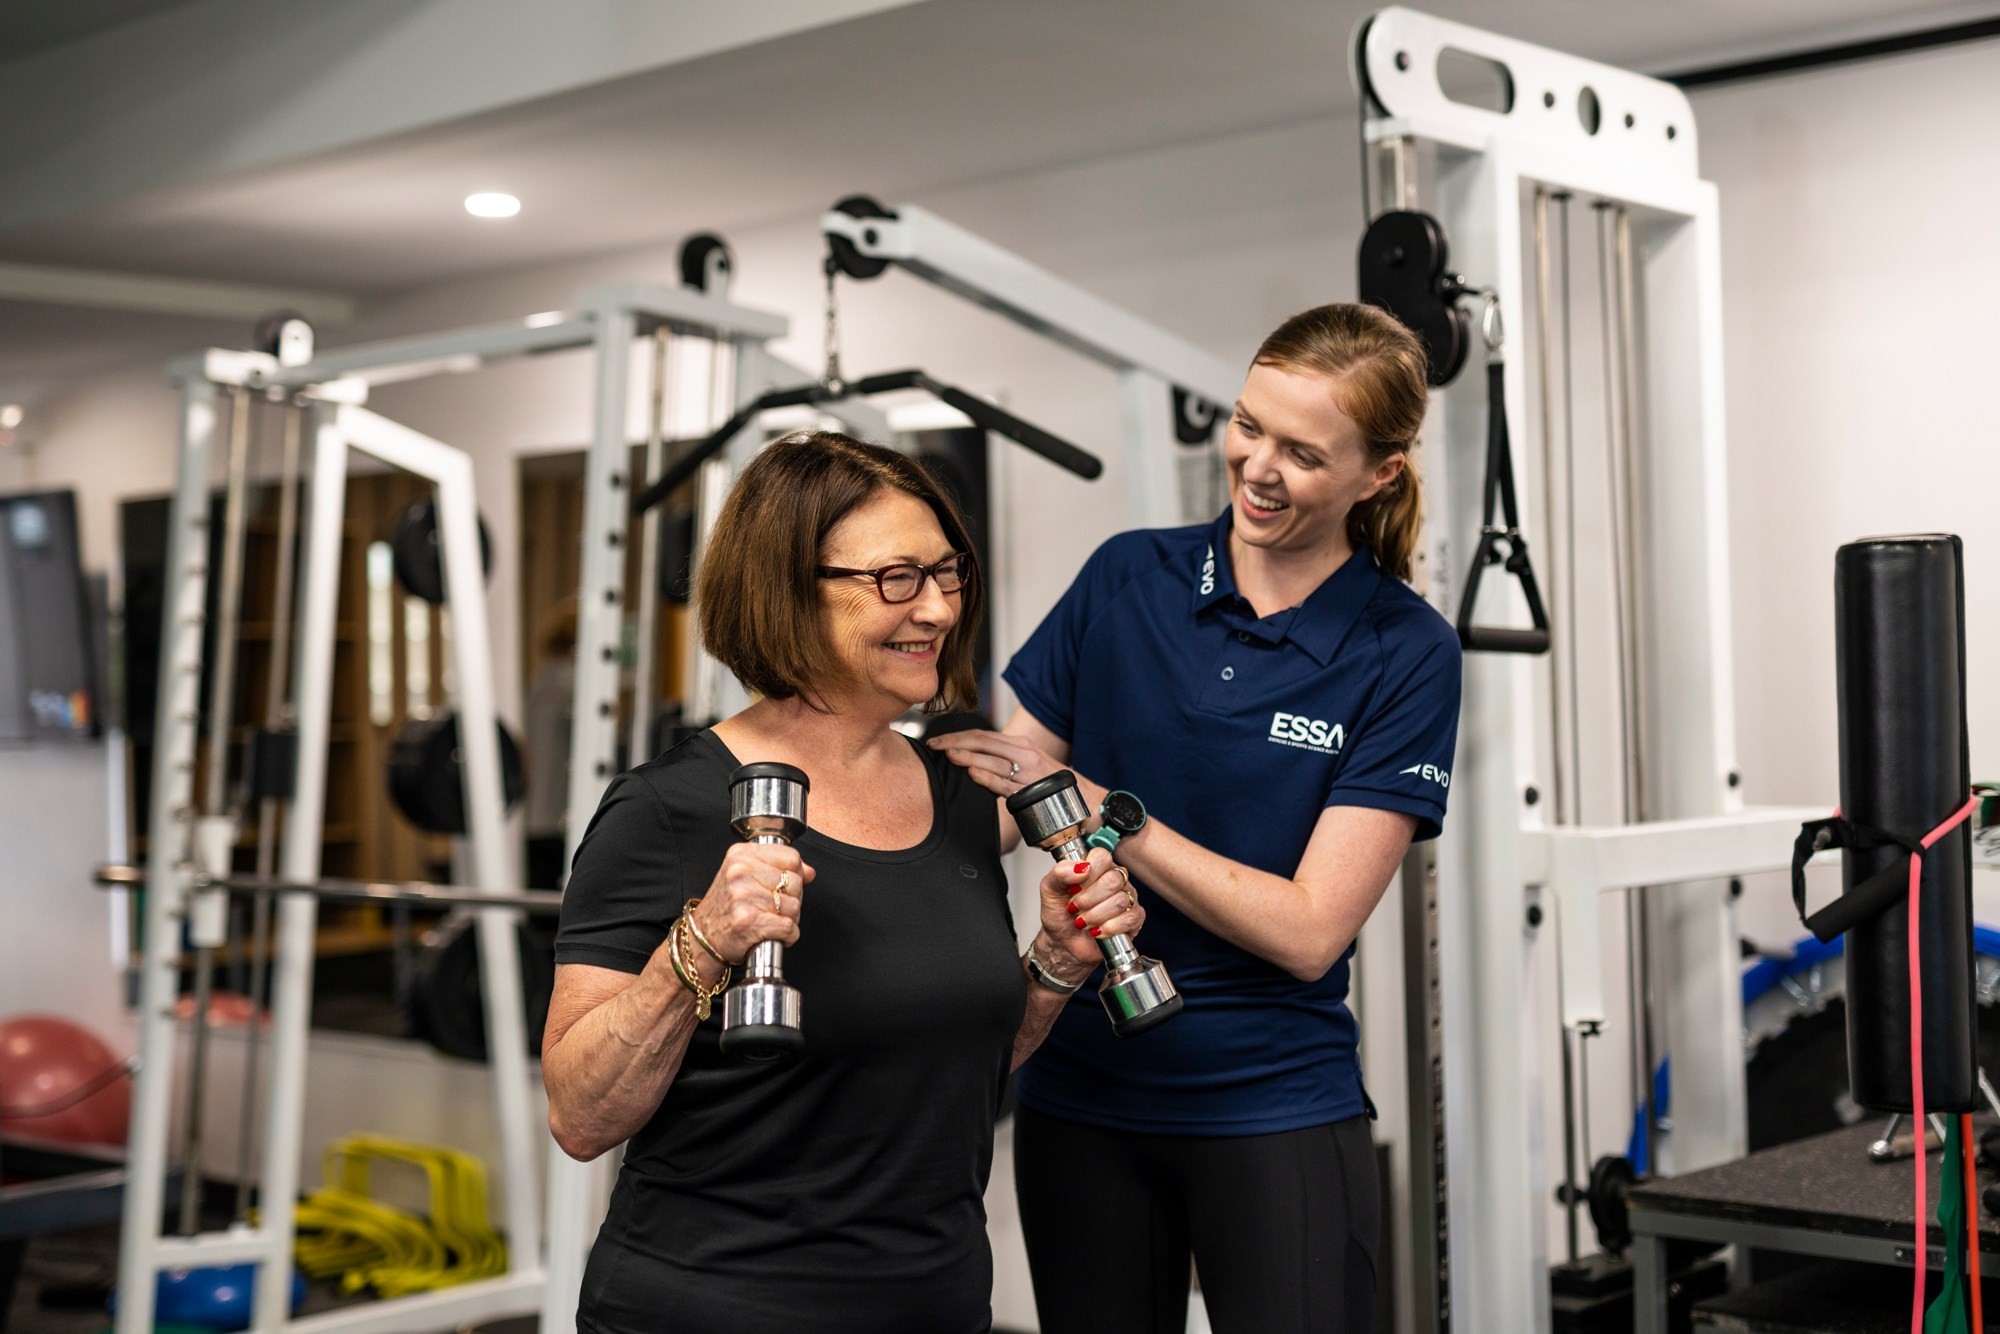 Exercise & Sports Science Australia (ESSA) Careers and Current Employee  Profiles | Find referrals | LinkedIn